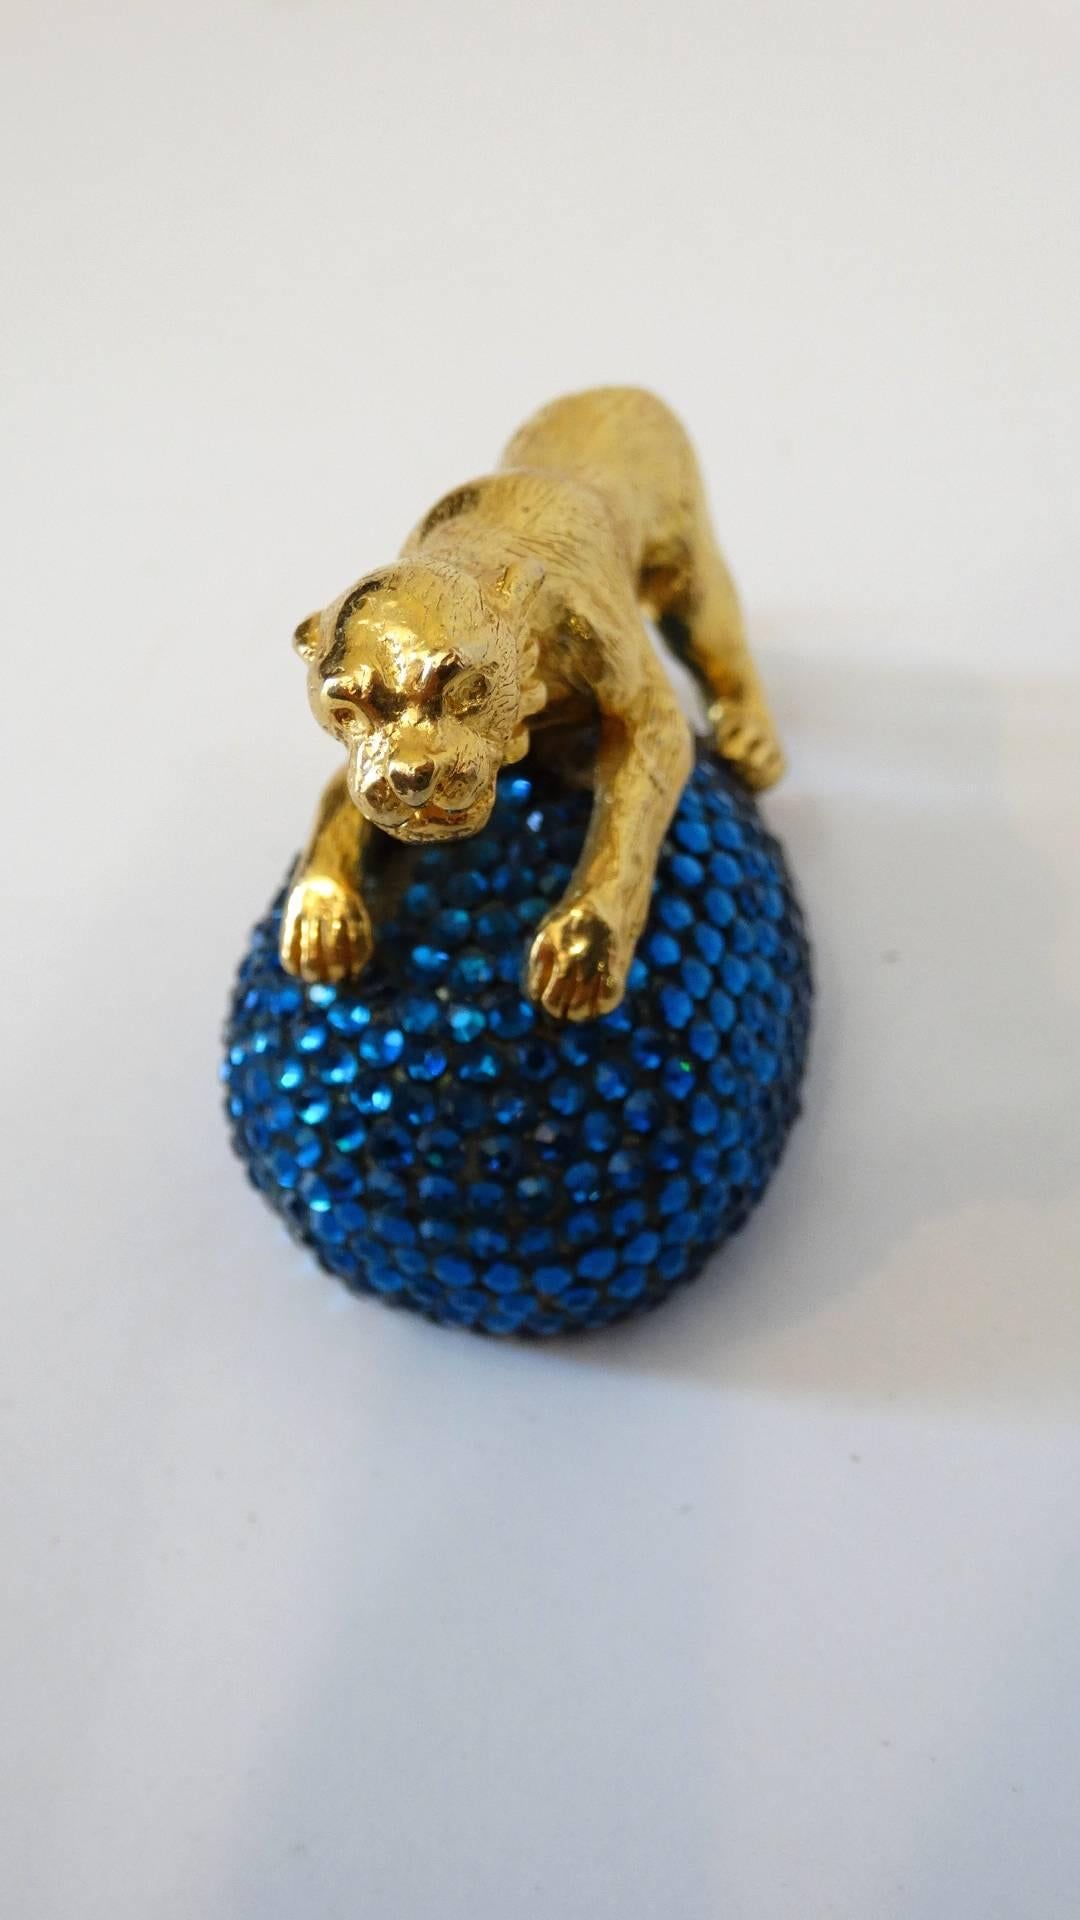  Extremely rare 1980's Judith Leiber Tiger vanity objet d'art . Gold plated hardware, with an encrusted Austrian Swarovski Crystals base. We have 8 in stock , see our other listings. Colors pink, green, white, blue and bronze, Signed Judith Leiber